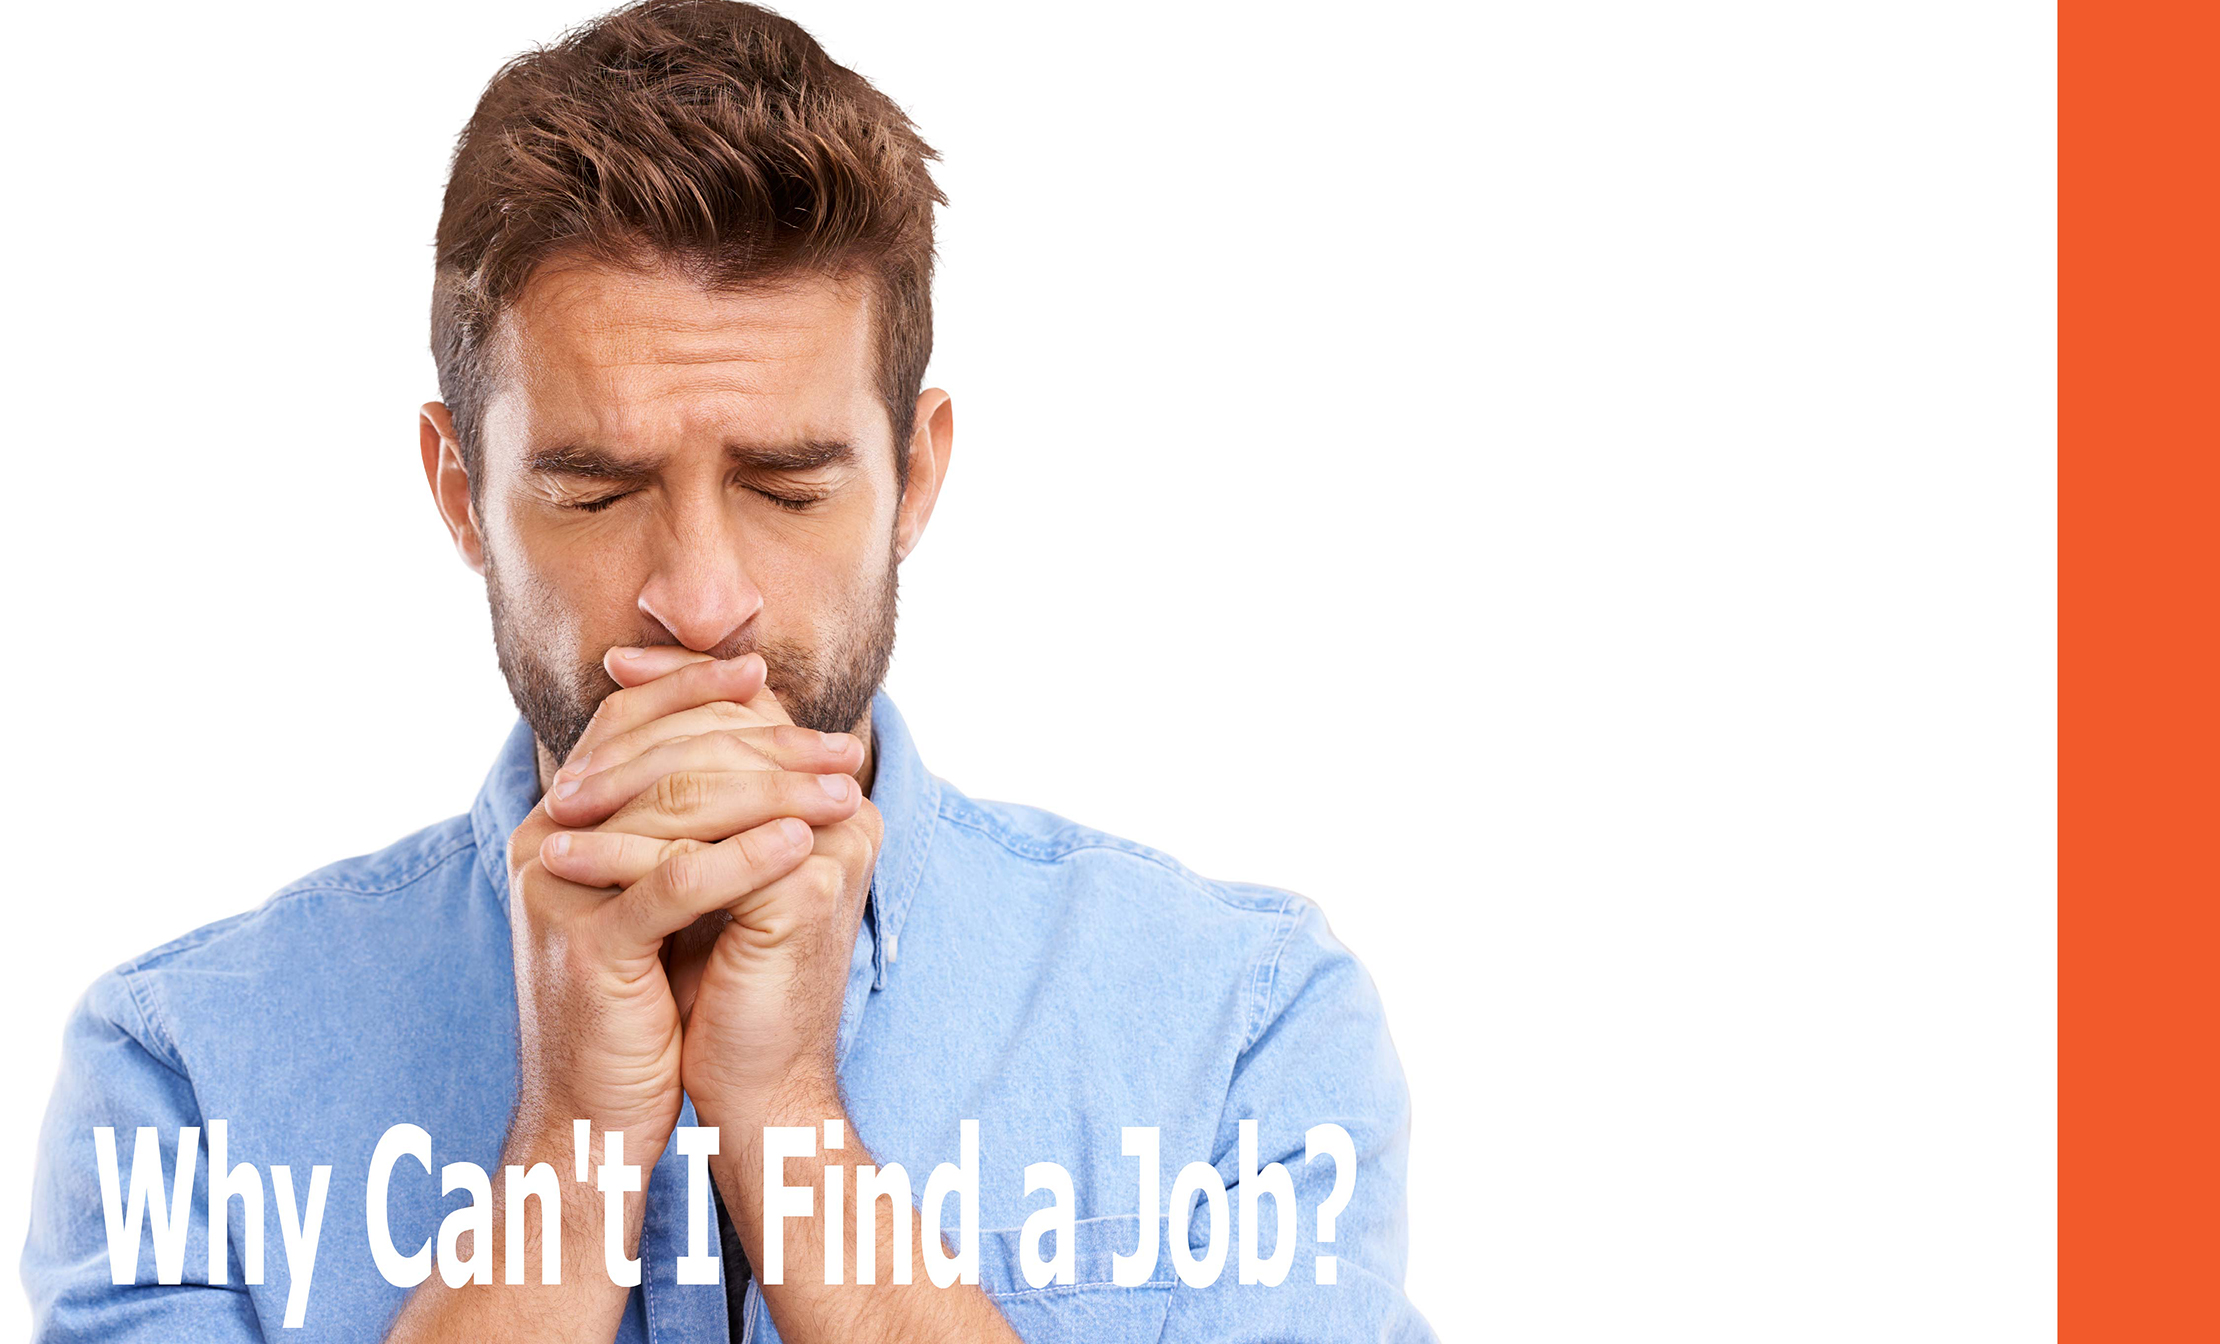 “Why Can’t I Find a Job?” Deciphering the Employment Puzzle in a Tight Labor Market